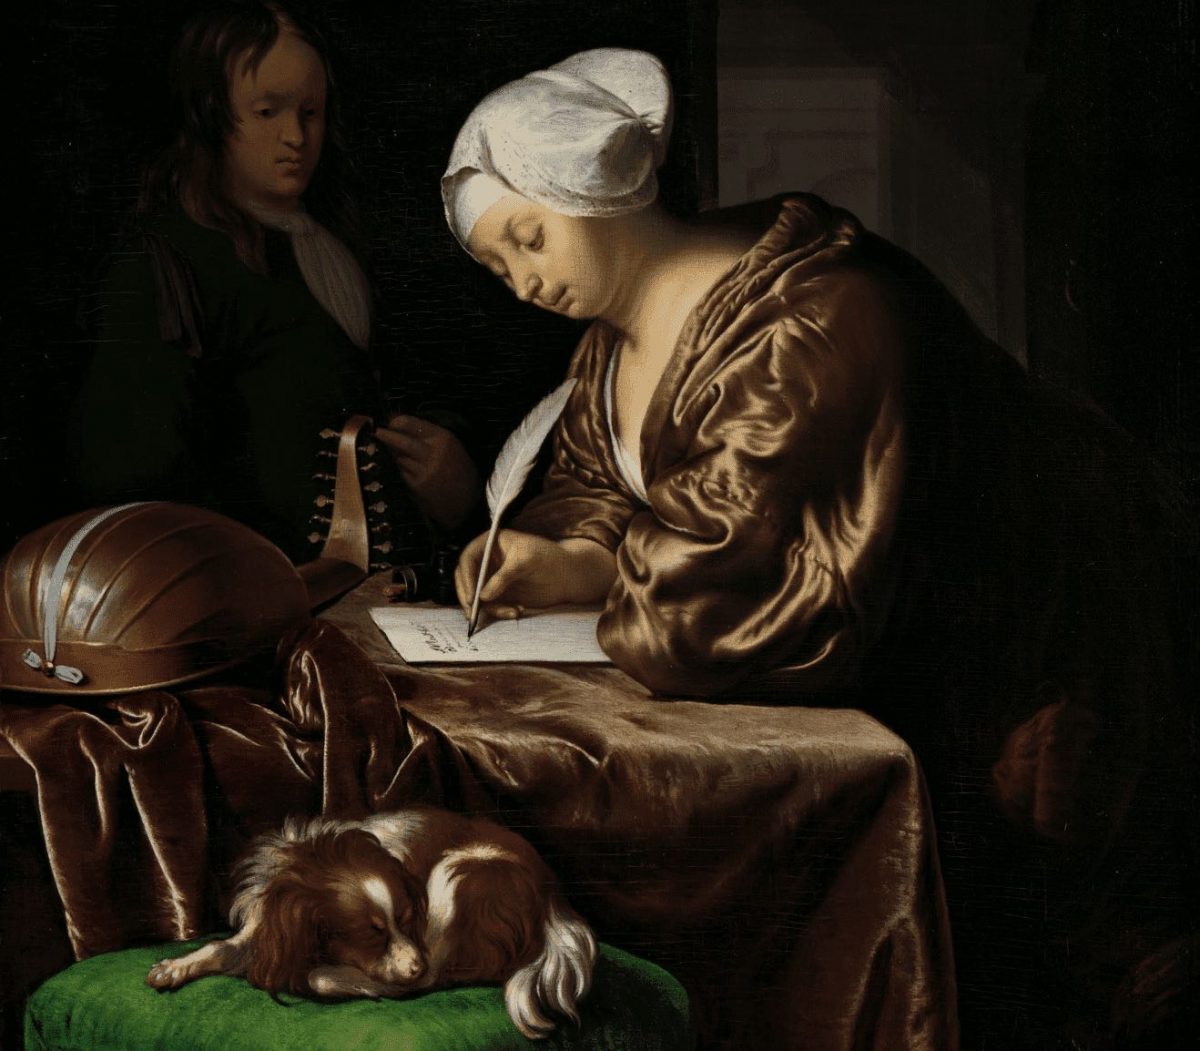 Painting of a woman writing with a quill in the Dutch style.